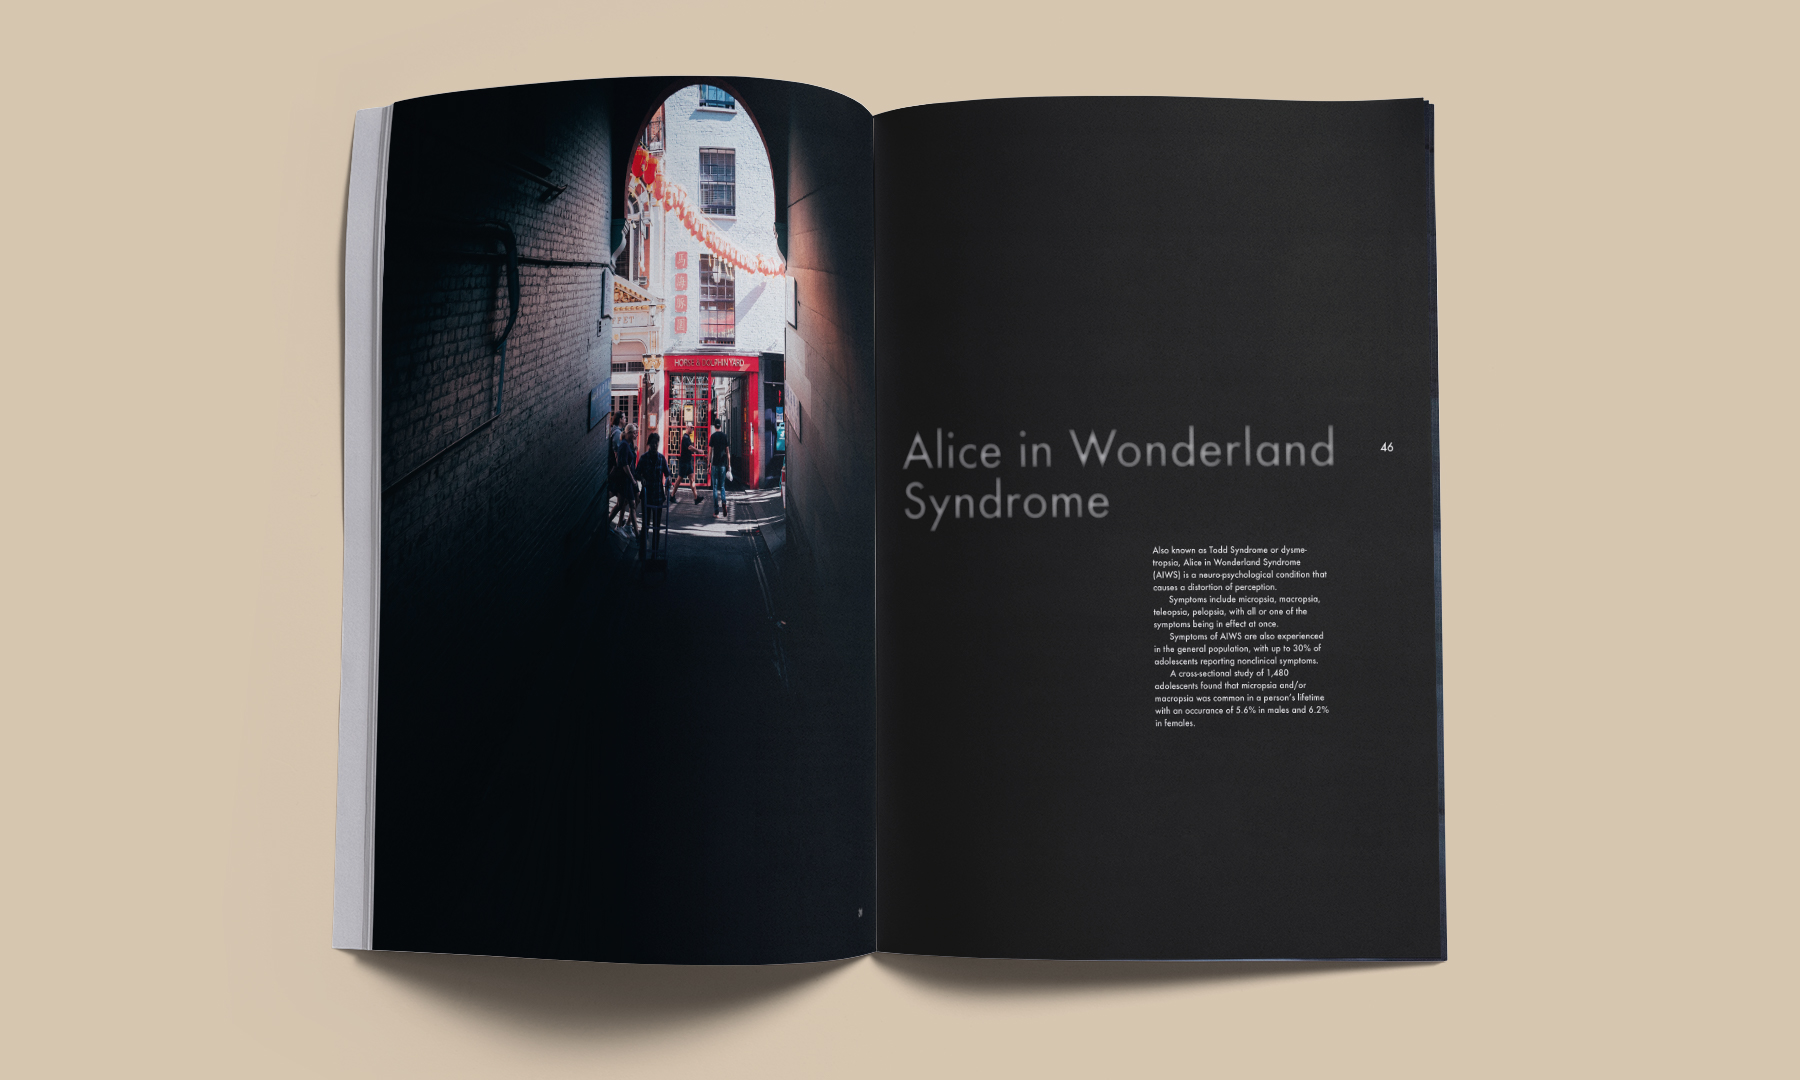 Chapter page for Alice in Wonderland Syndrome (AIWS), which affects visual perception.